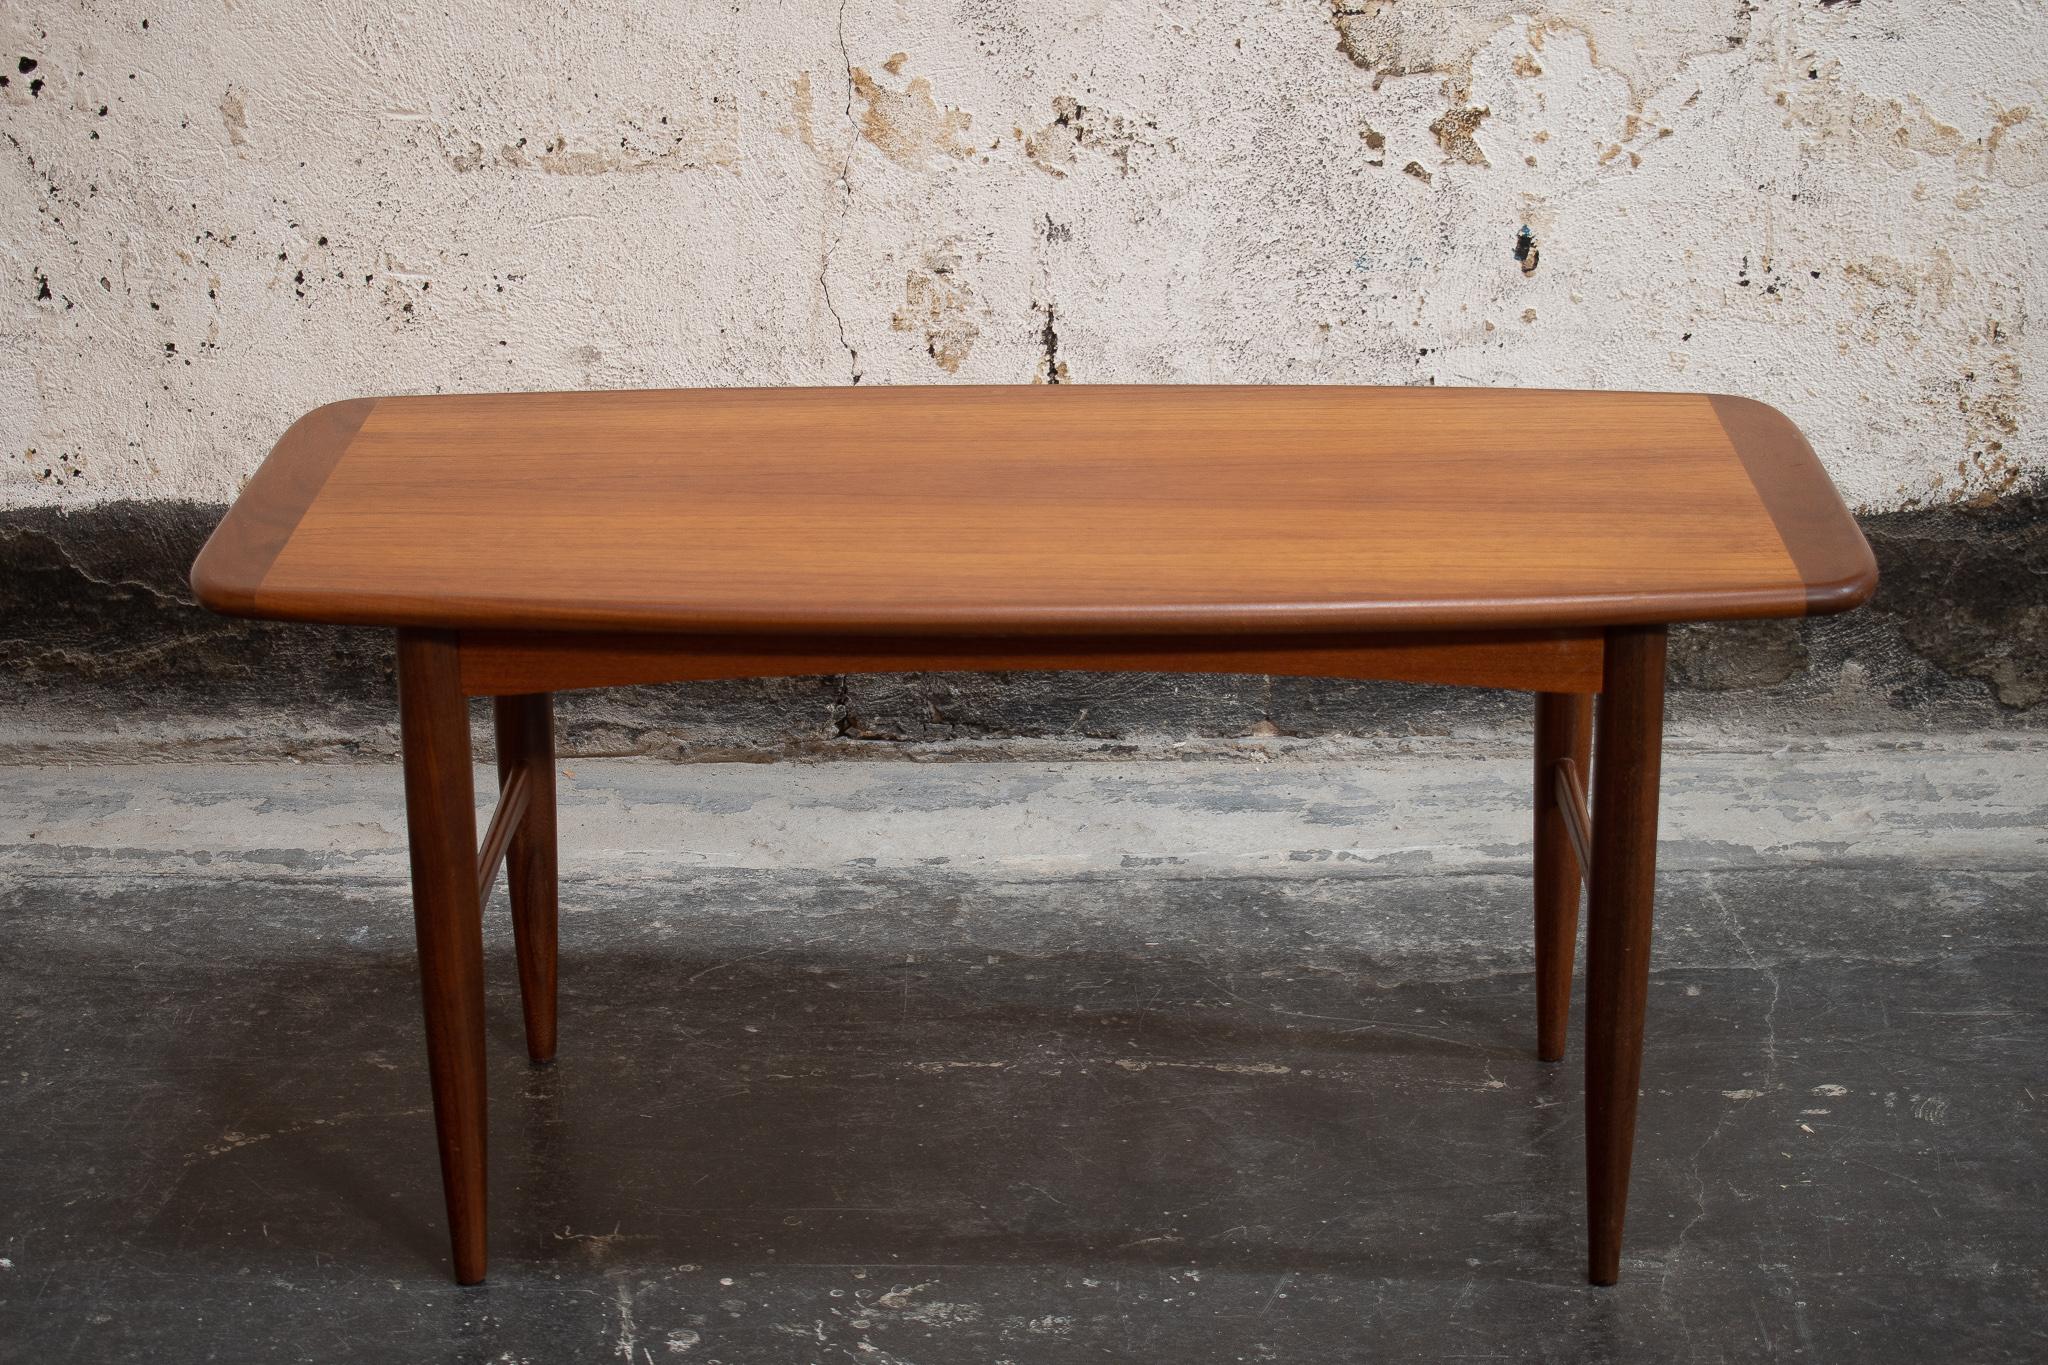 Midcentury Swedish long and slender coffee table, with dark teak border detail. Slightly rounded corners and turned legs complete the perfect mid-mod look. This elegant and understated coffee-table would work well in many design styles including